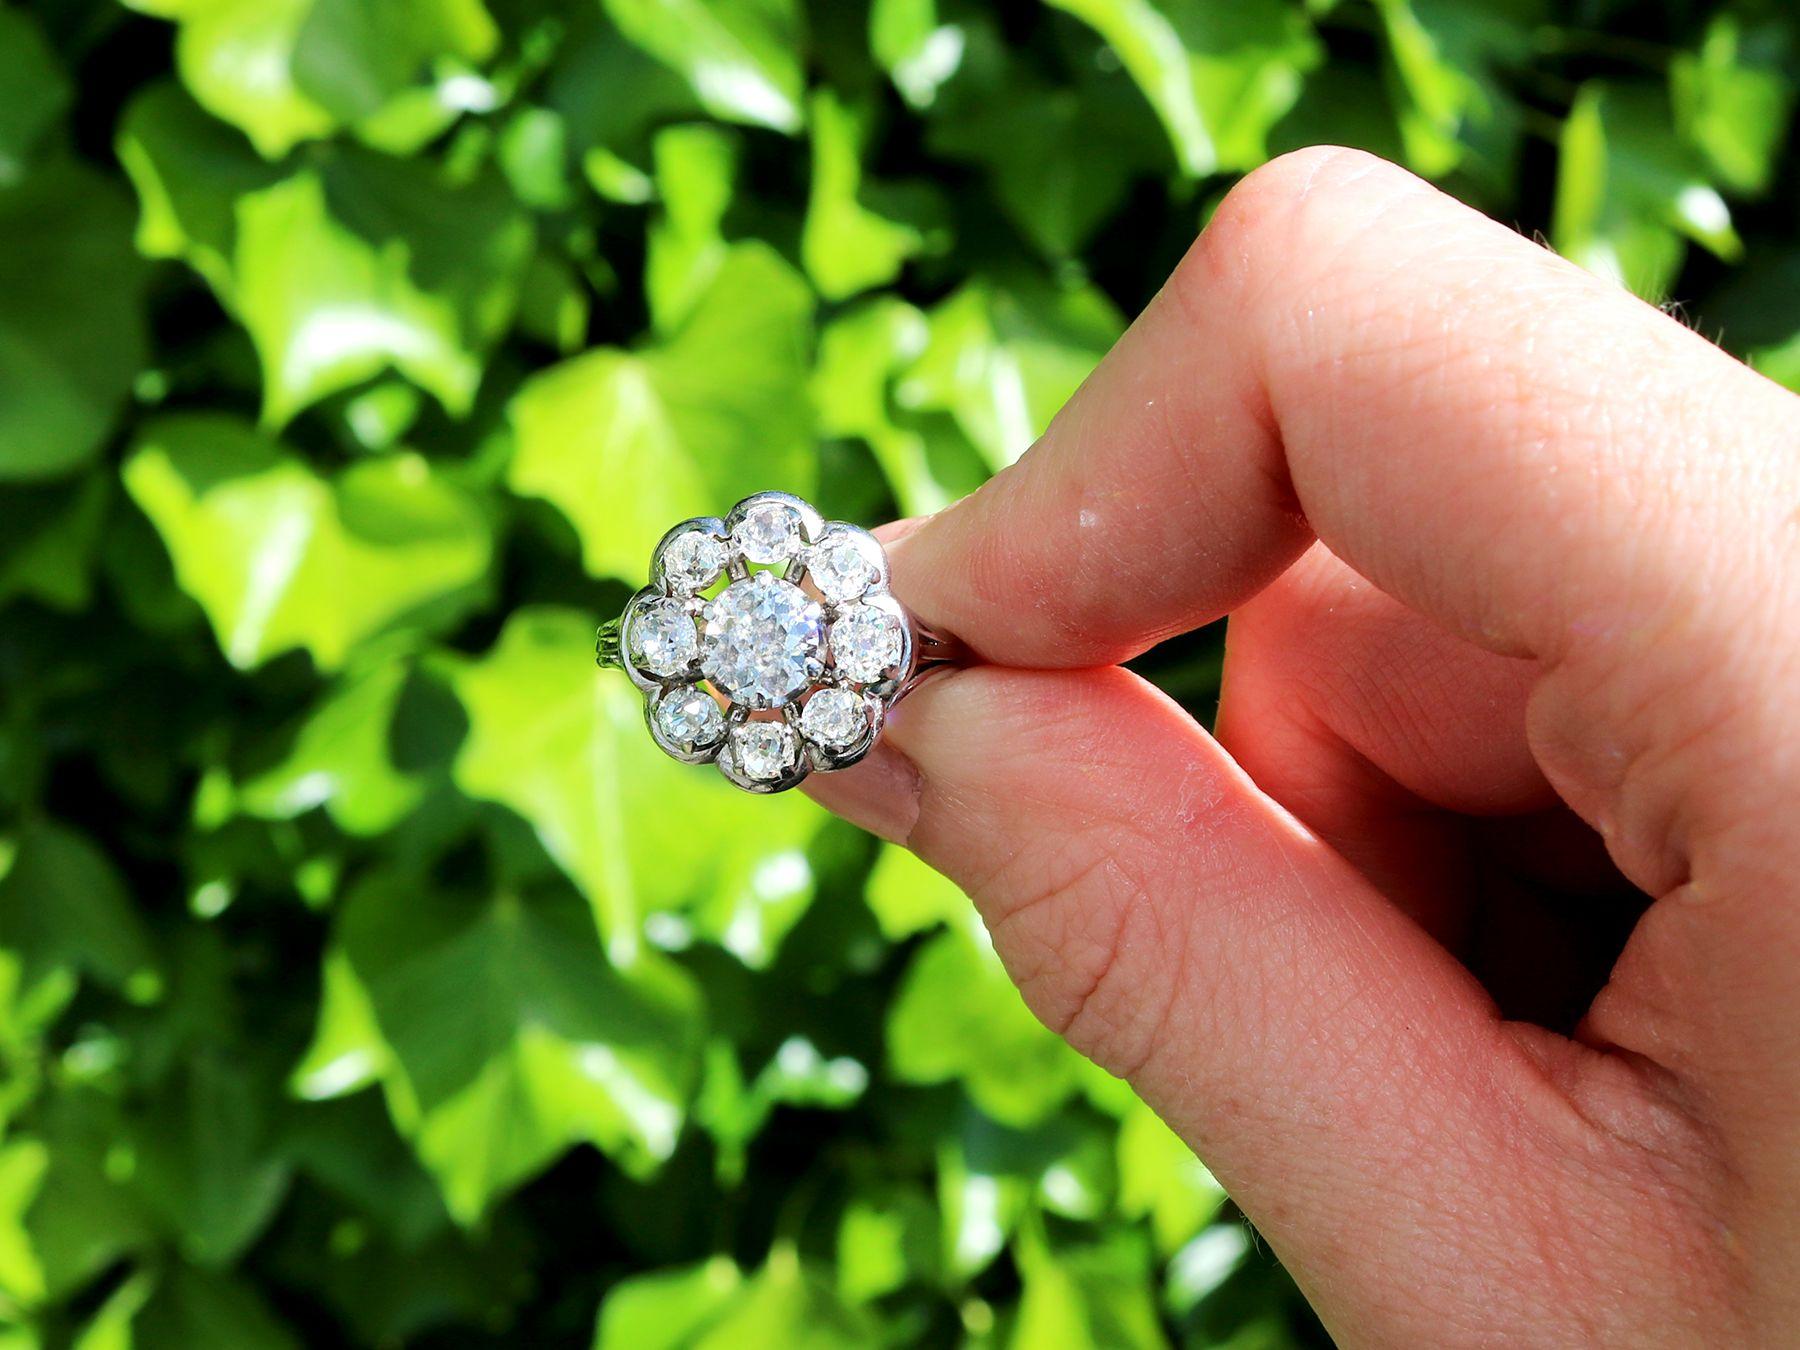 A stunning antique 1930's 2.66 carat diamond and platinum cluster style dress ring; part of our diverse antique jewellery and estate jewelry collections

This stunning, fine and impressive antique 1930's diamond cluster ring has been crafted in